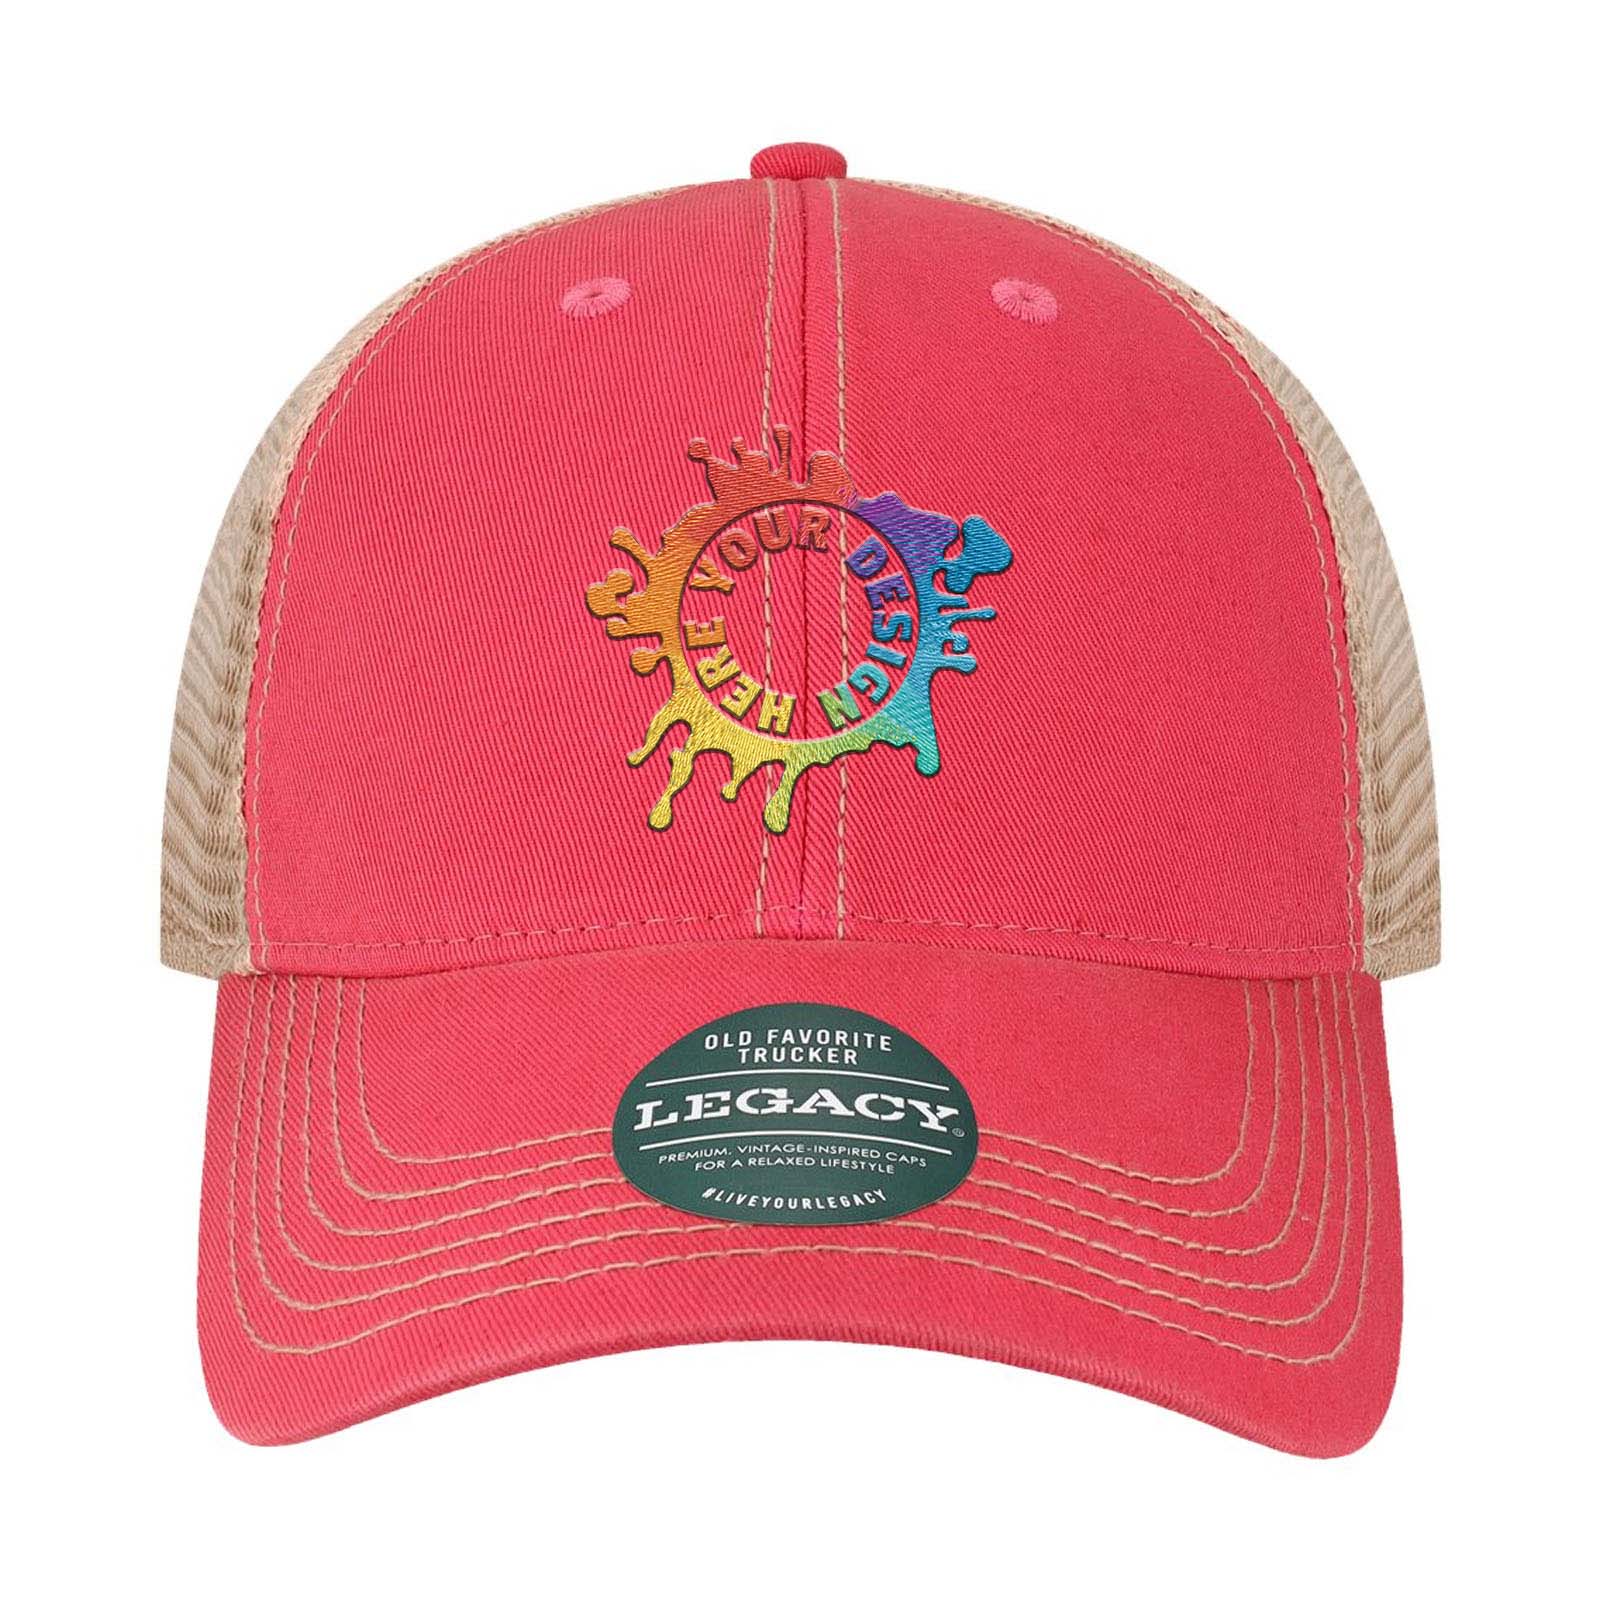 Embroidered LEGACY Youth Old Favorite Trucker Cap - Mato & Hash